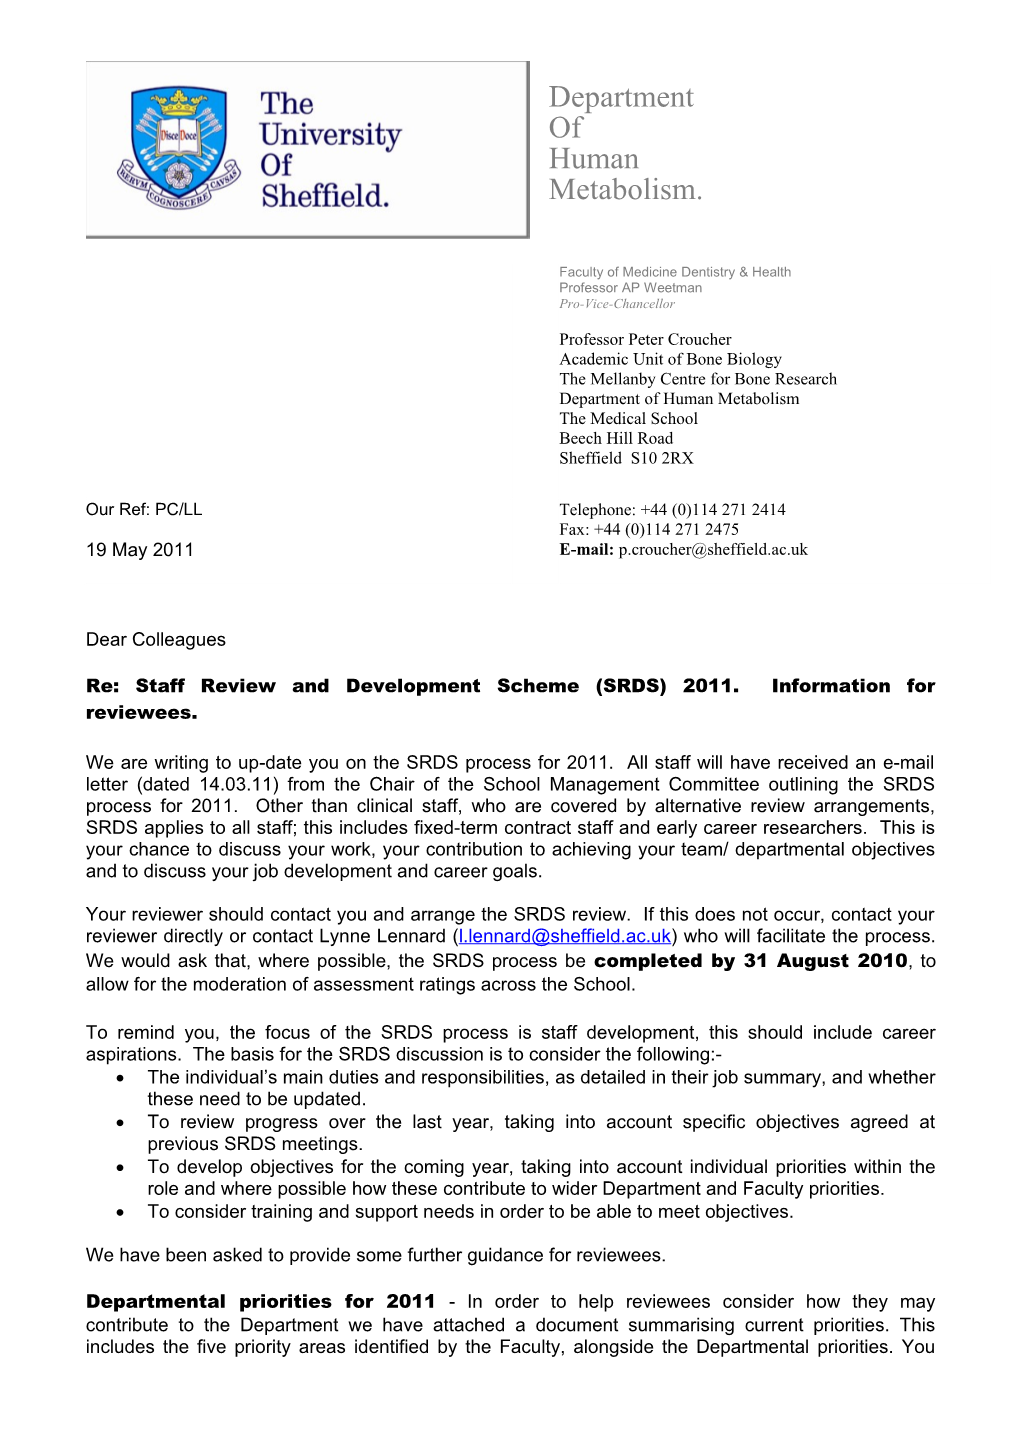 Re: Staff Review and Development Scheme (SRDS) 2011. Information for Reviewees